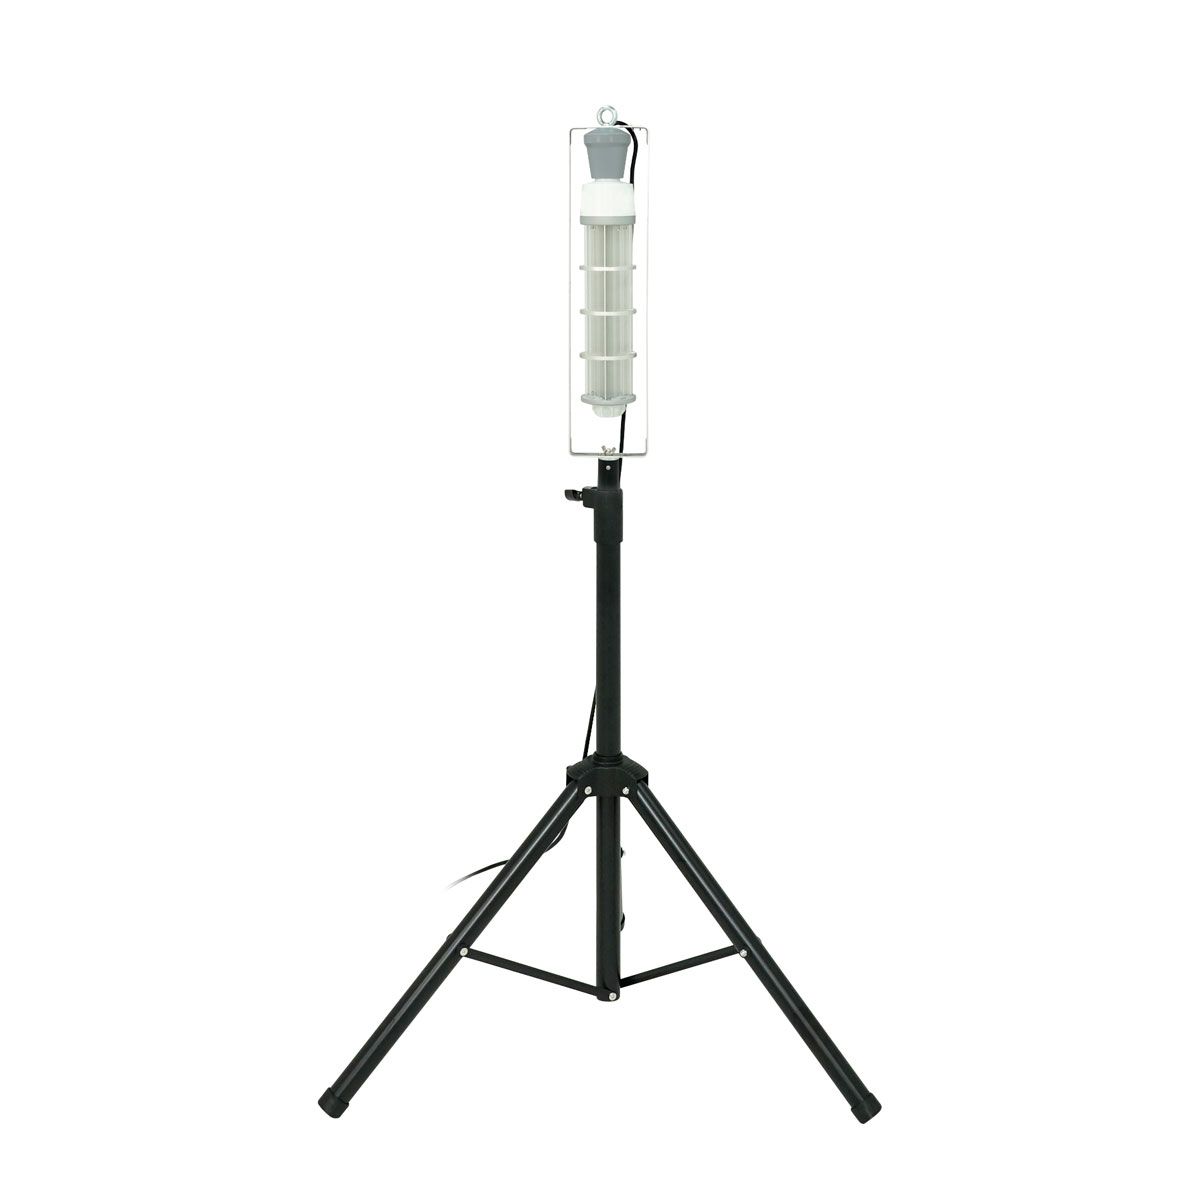 80W UVC Corn Light for Portable Surface Disinfection